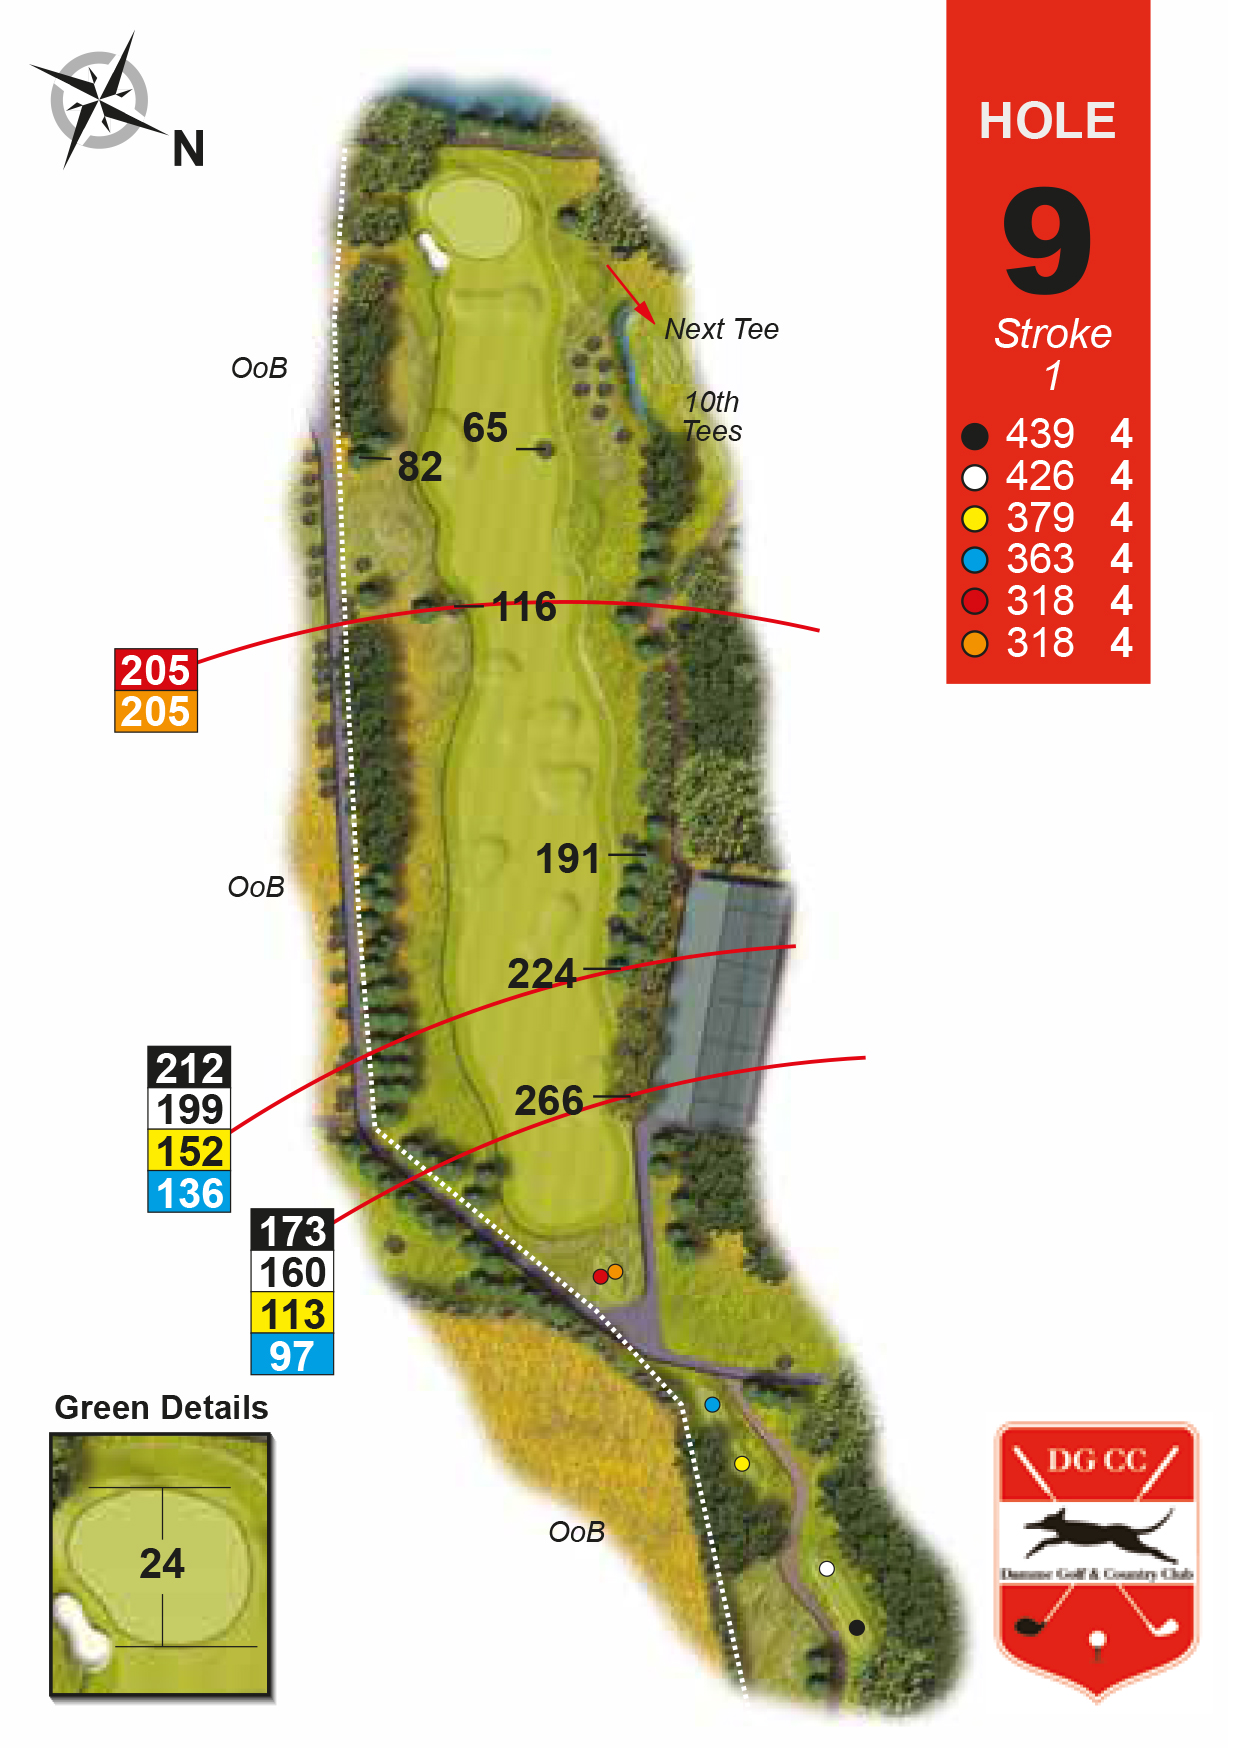 Hole 9 : The White Willow (Salix)